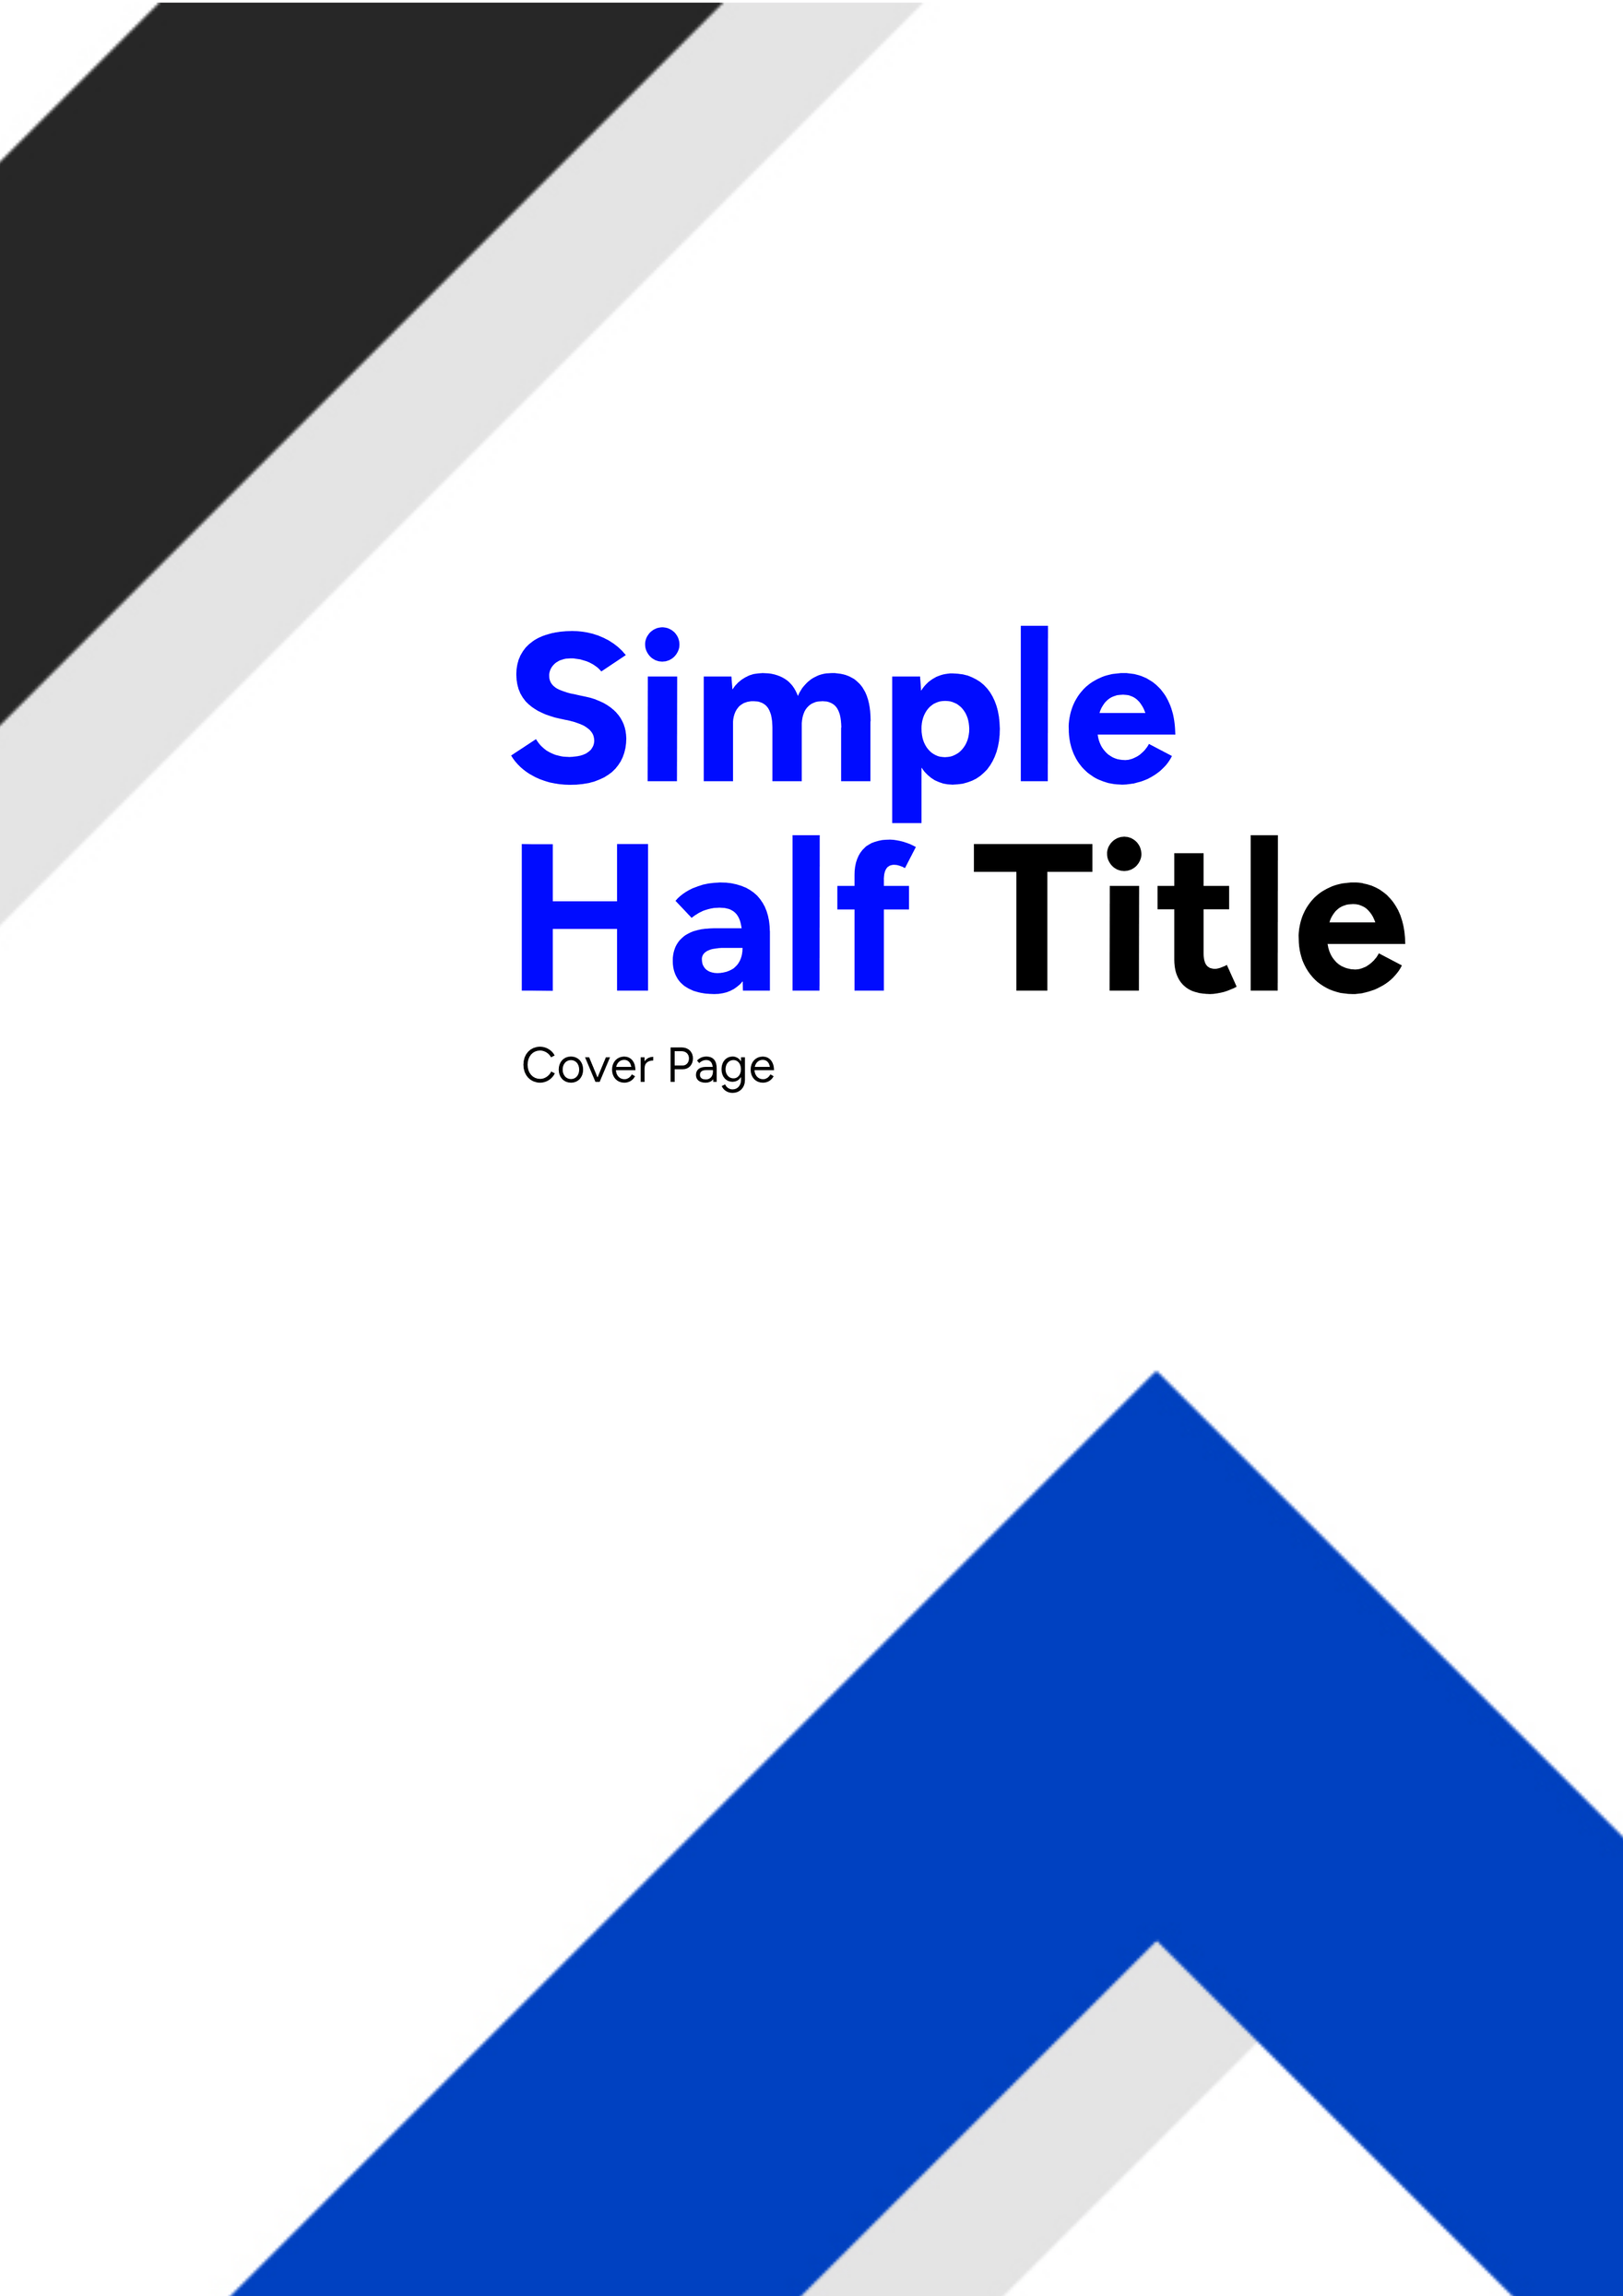 Simple Half Title Cover Page Template